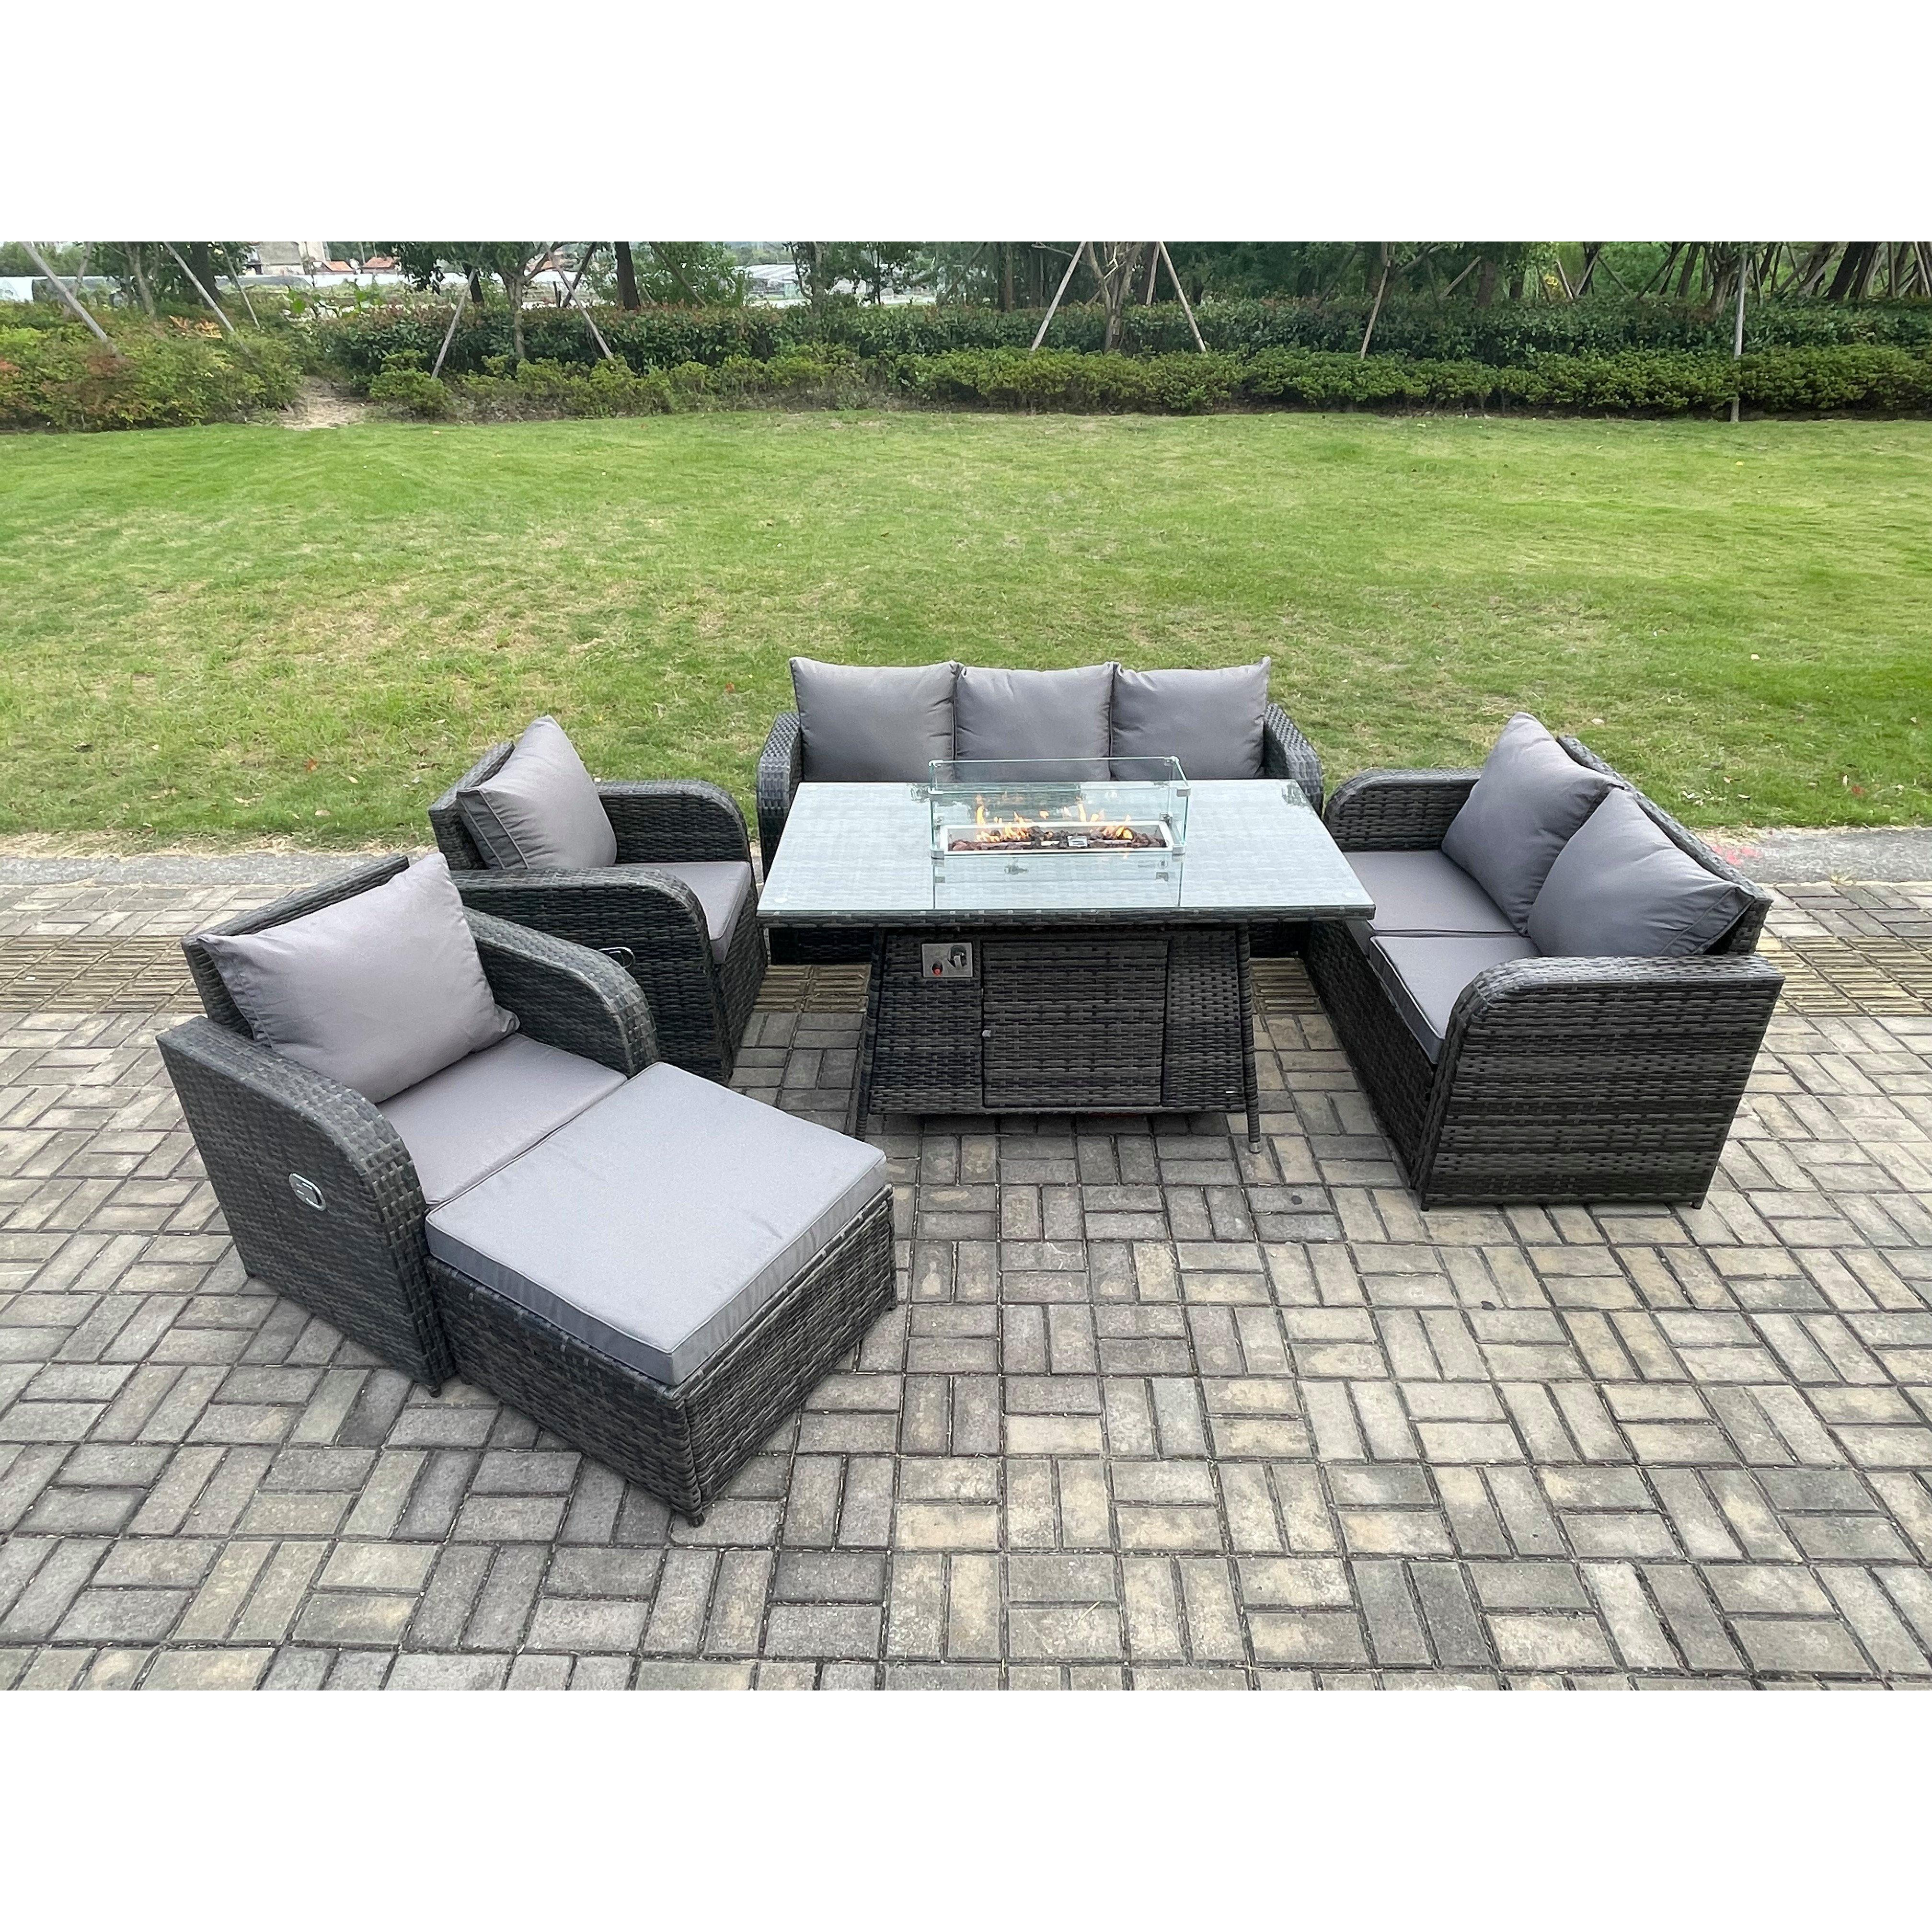 PE Wicker Outdoor Rattan Garden Furniture Set Propane Gas Fire Pit Table and Sofa Chair set with Big Footstool - image 1